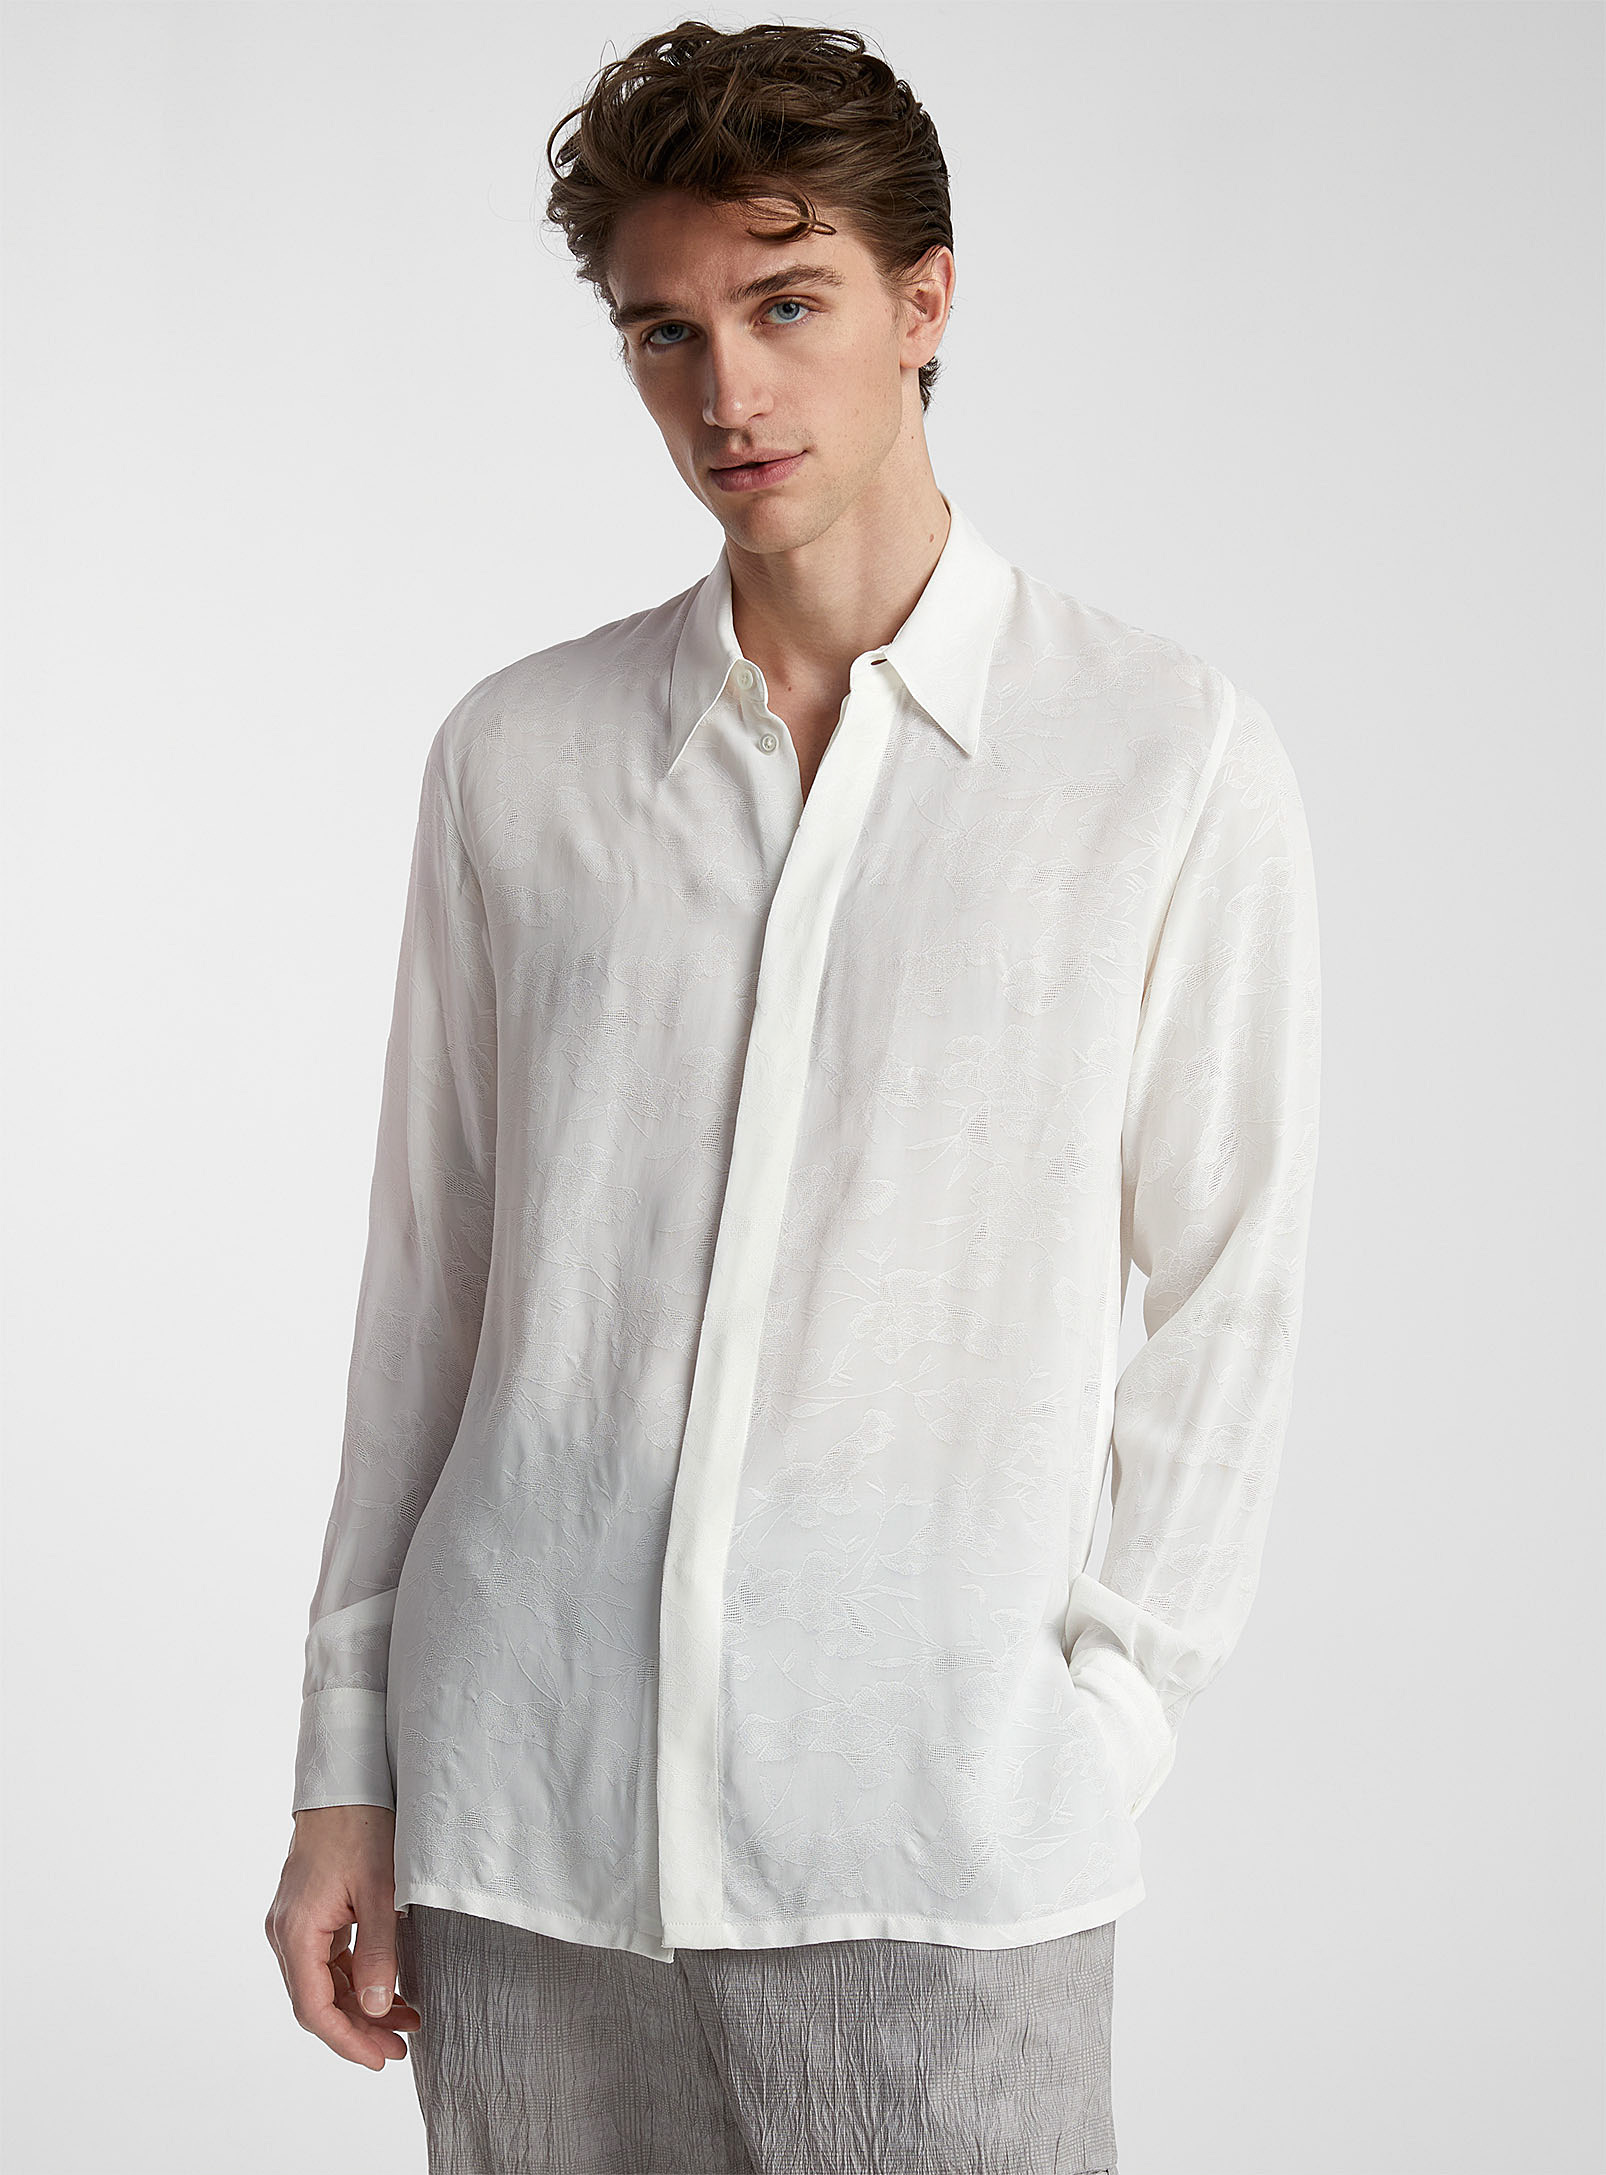 Emporio Armani - Men's Flowy embroidered flowers shirt